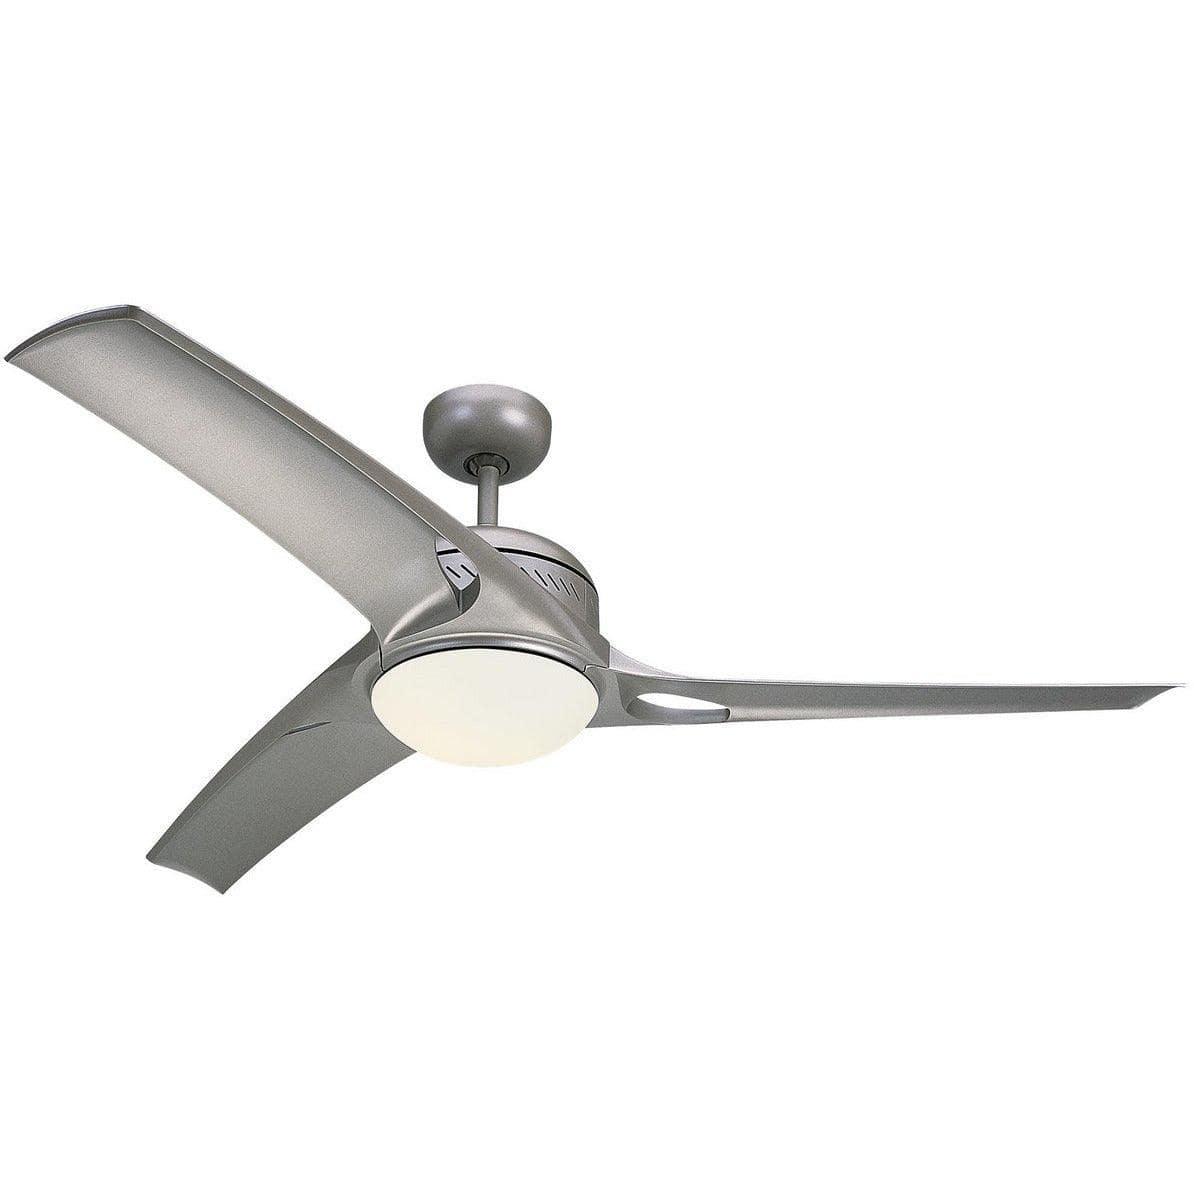 Visual Comfort Fan Collection - Mach One 52" Ceiling Fan - 3MO52TMO-V1 | Montreal Lighting & Hardware